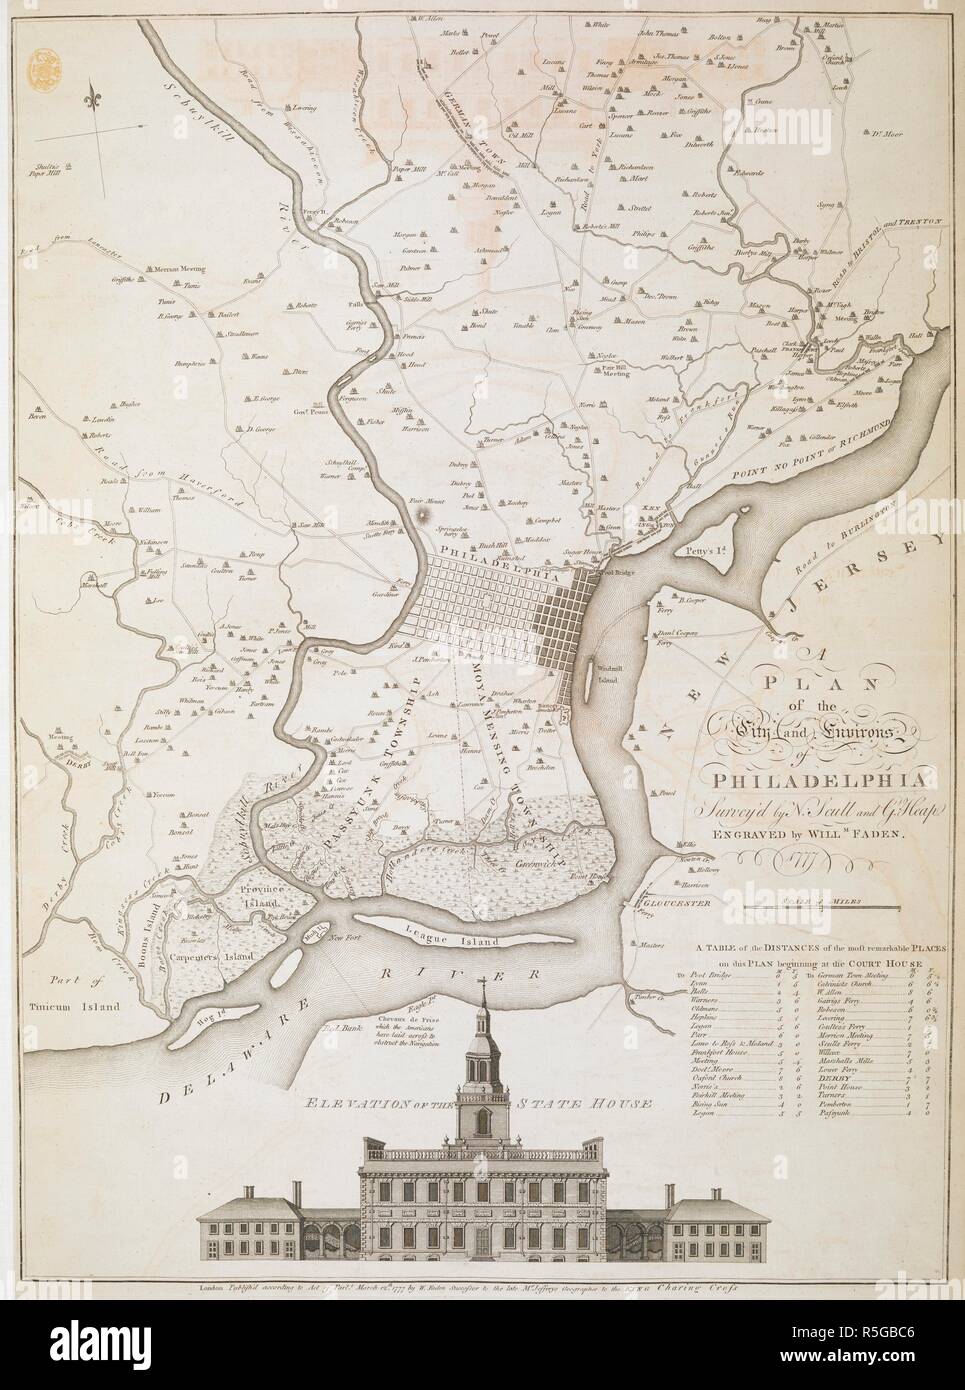 A plan of the City and Environs of Philadelphia. A PLAN of the City and Environs of PHILADELPHIA. London : Publish'd according to Act of Parl.t March 12.th 1777 by W. Faden Successor to the late Mr. Jefferys Geographer to the KING Charing Cross, [March 12.th 1777.]. Copperplate engraving. Source: Maps K.Top.122.6.1. Language: English. Stock Photo